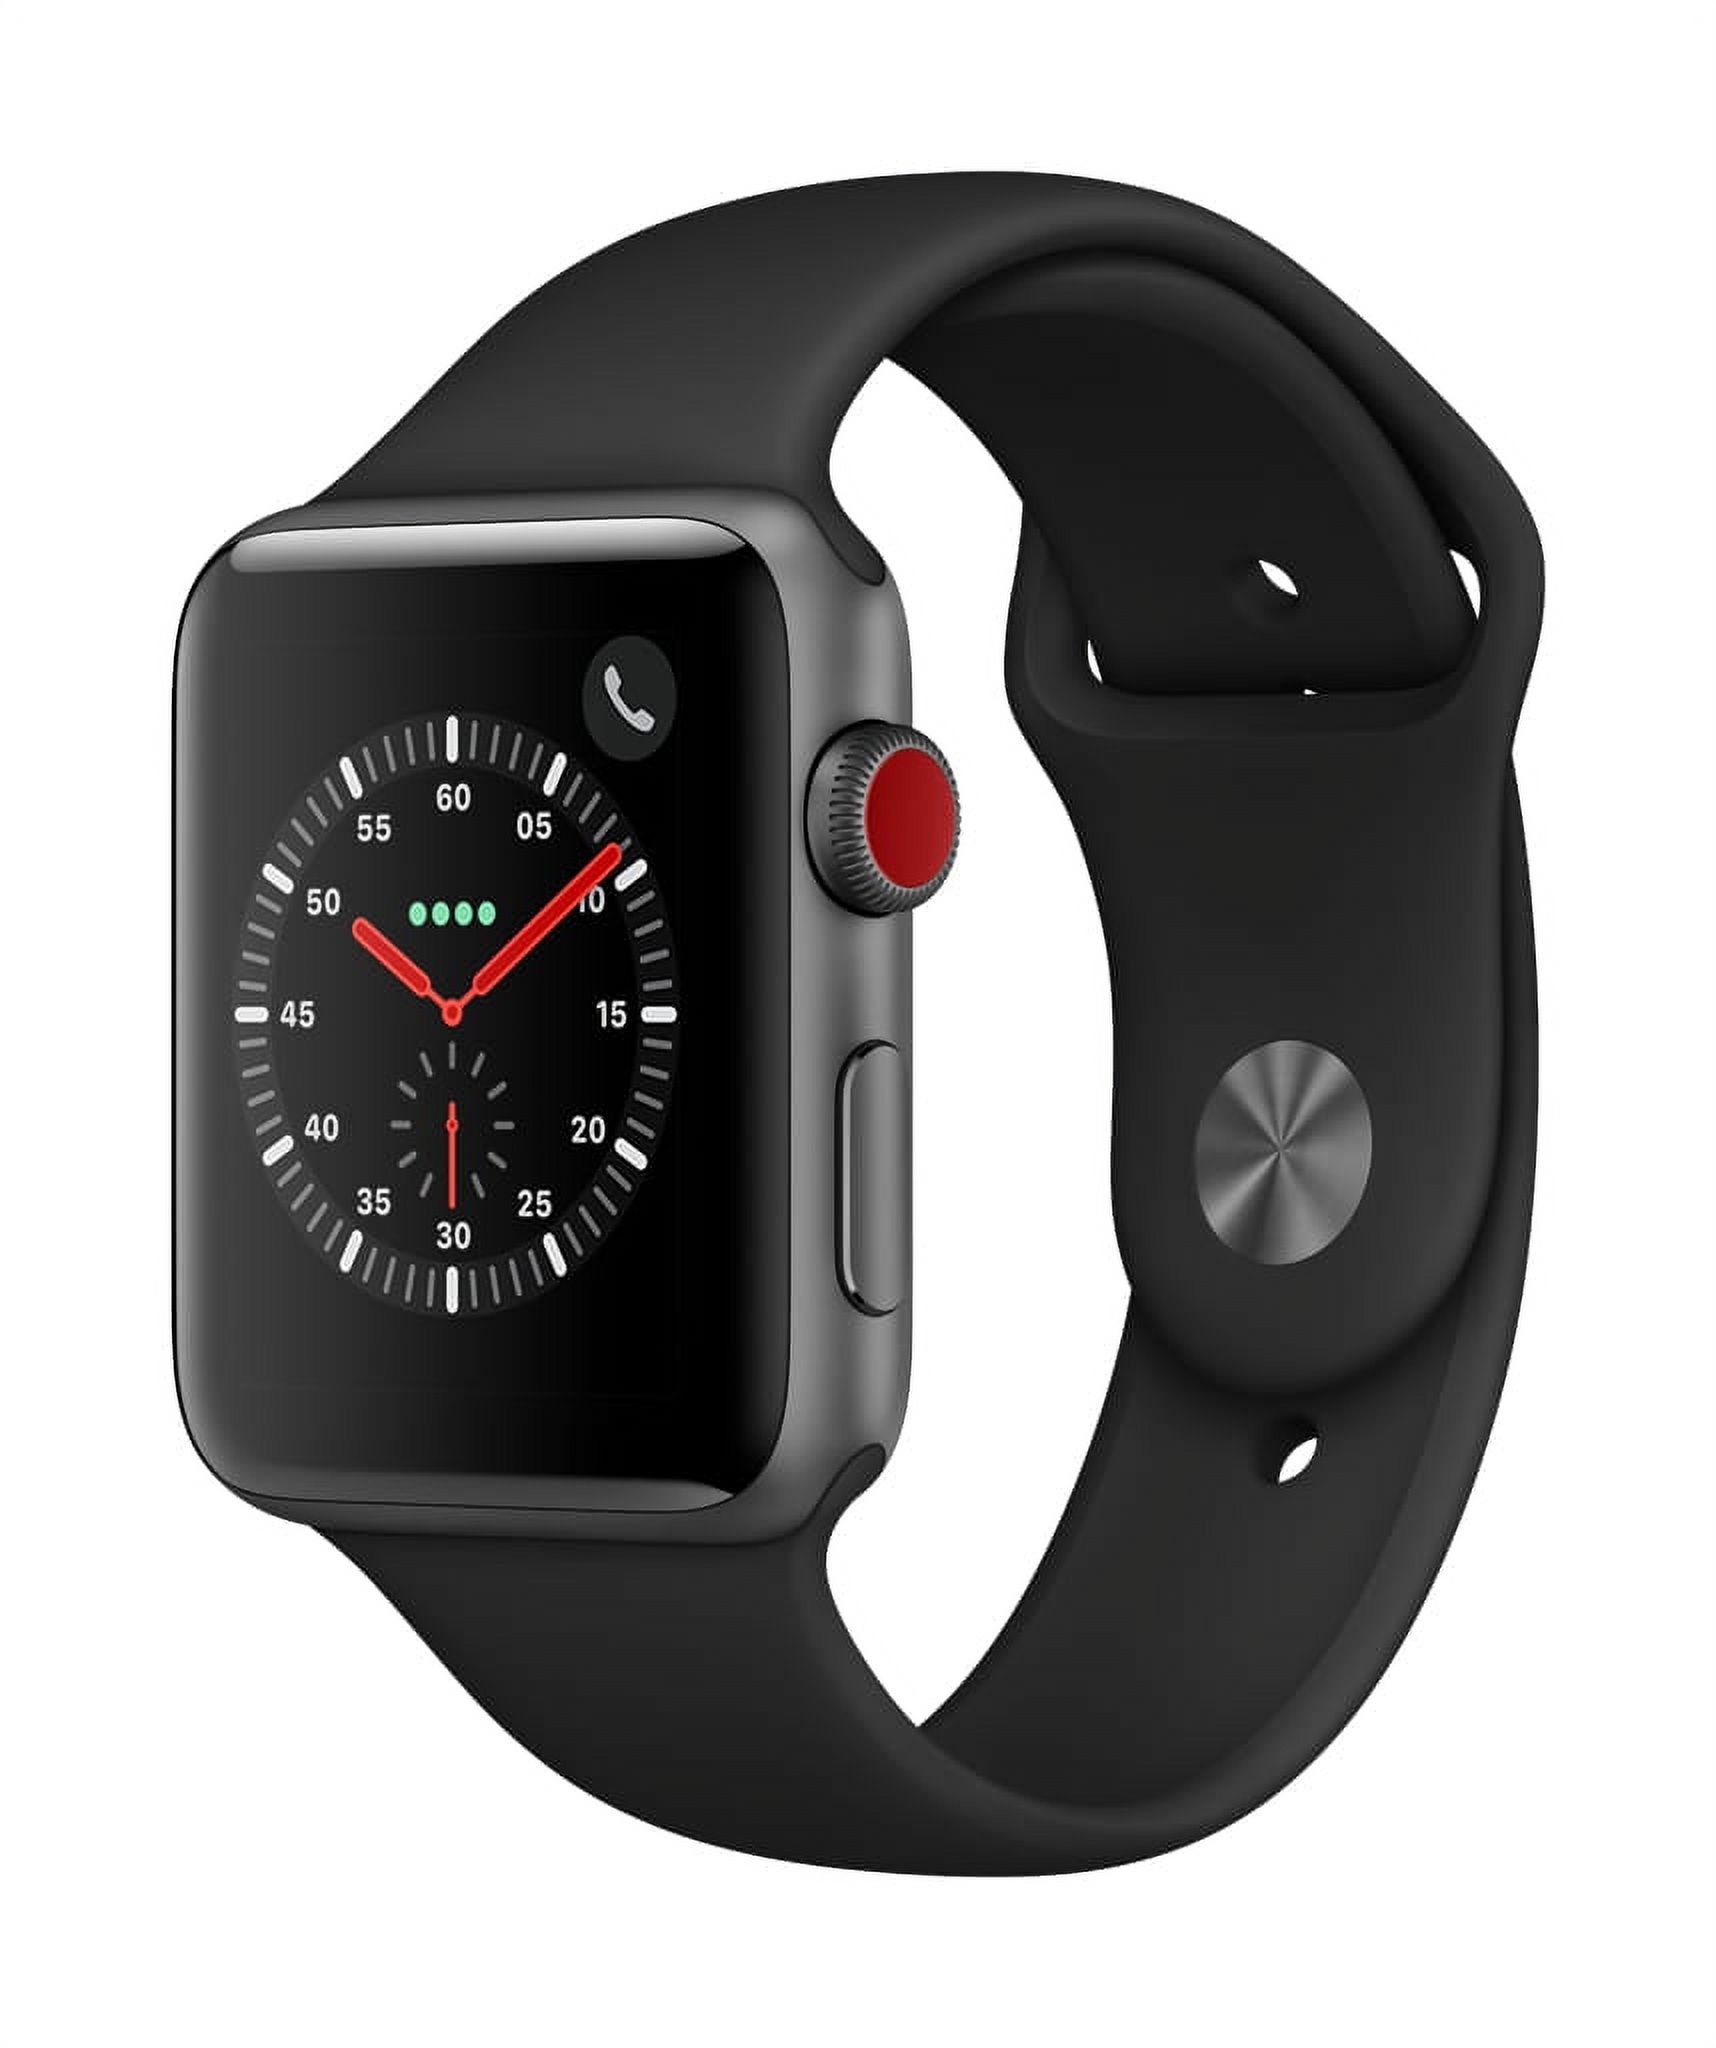 Apple Watch Series 3 GPS + Cellular - 42mm - Sport Band - Aluminum Case - image 1 of 2